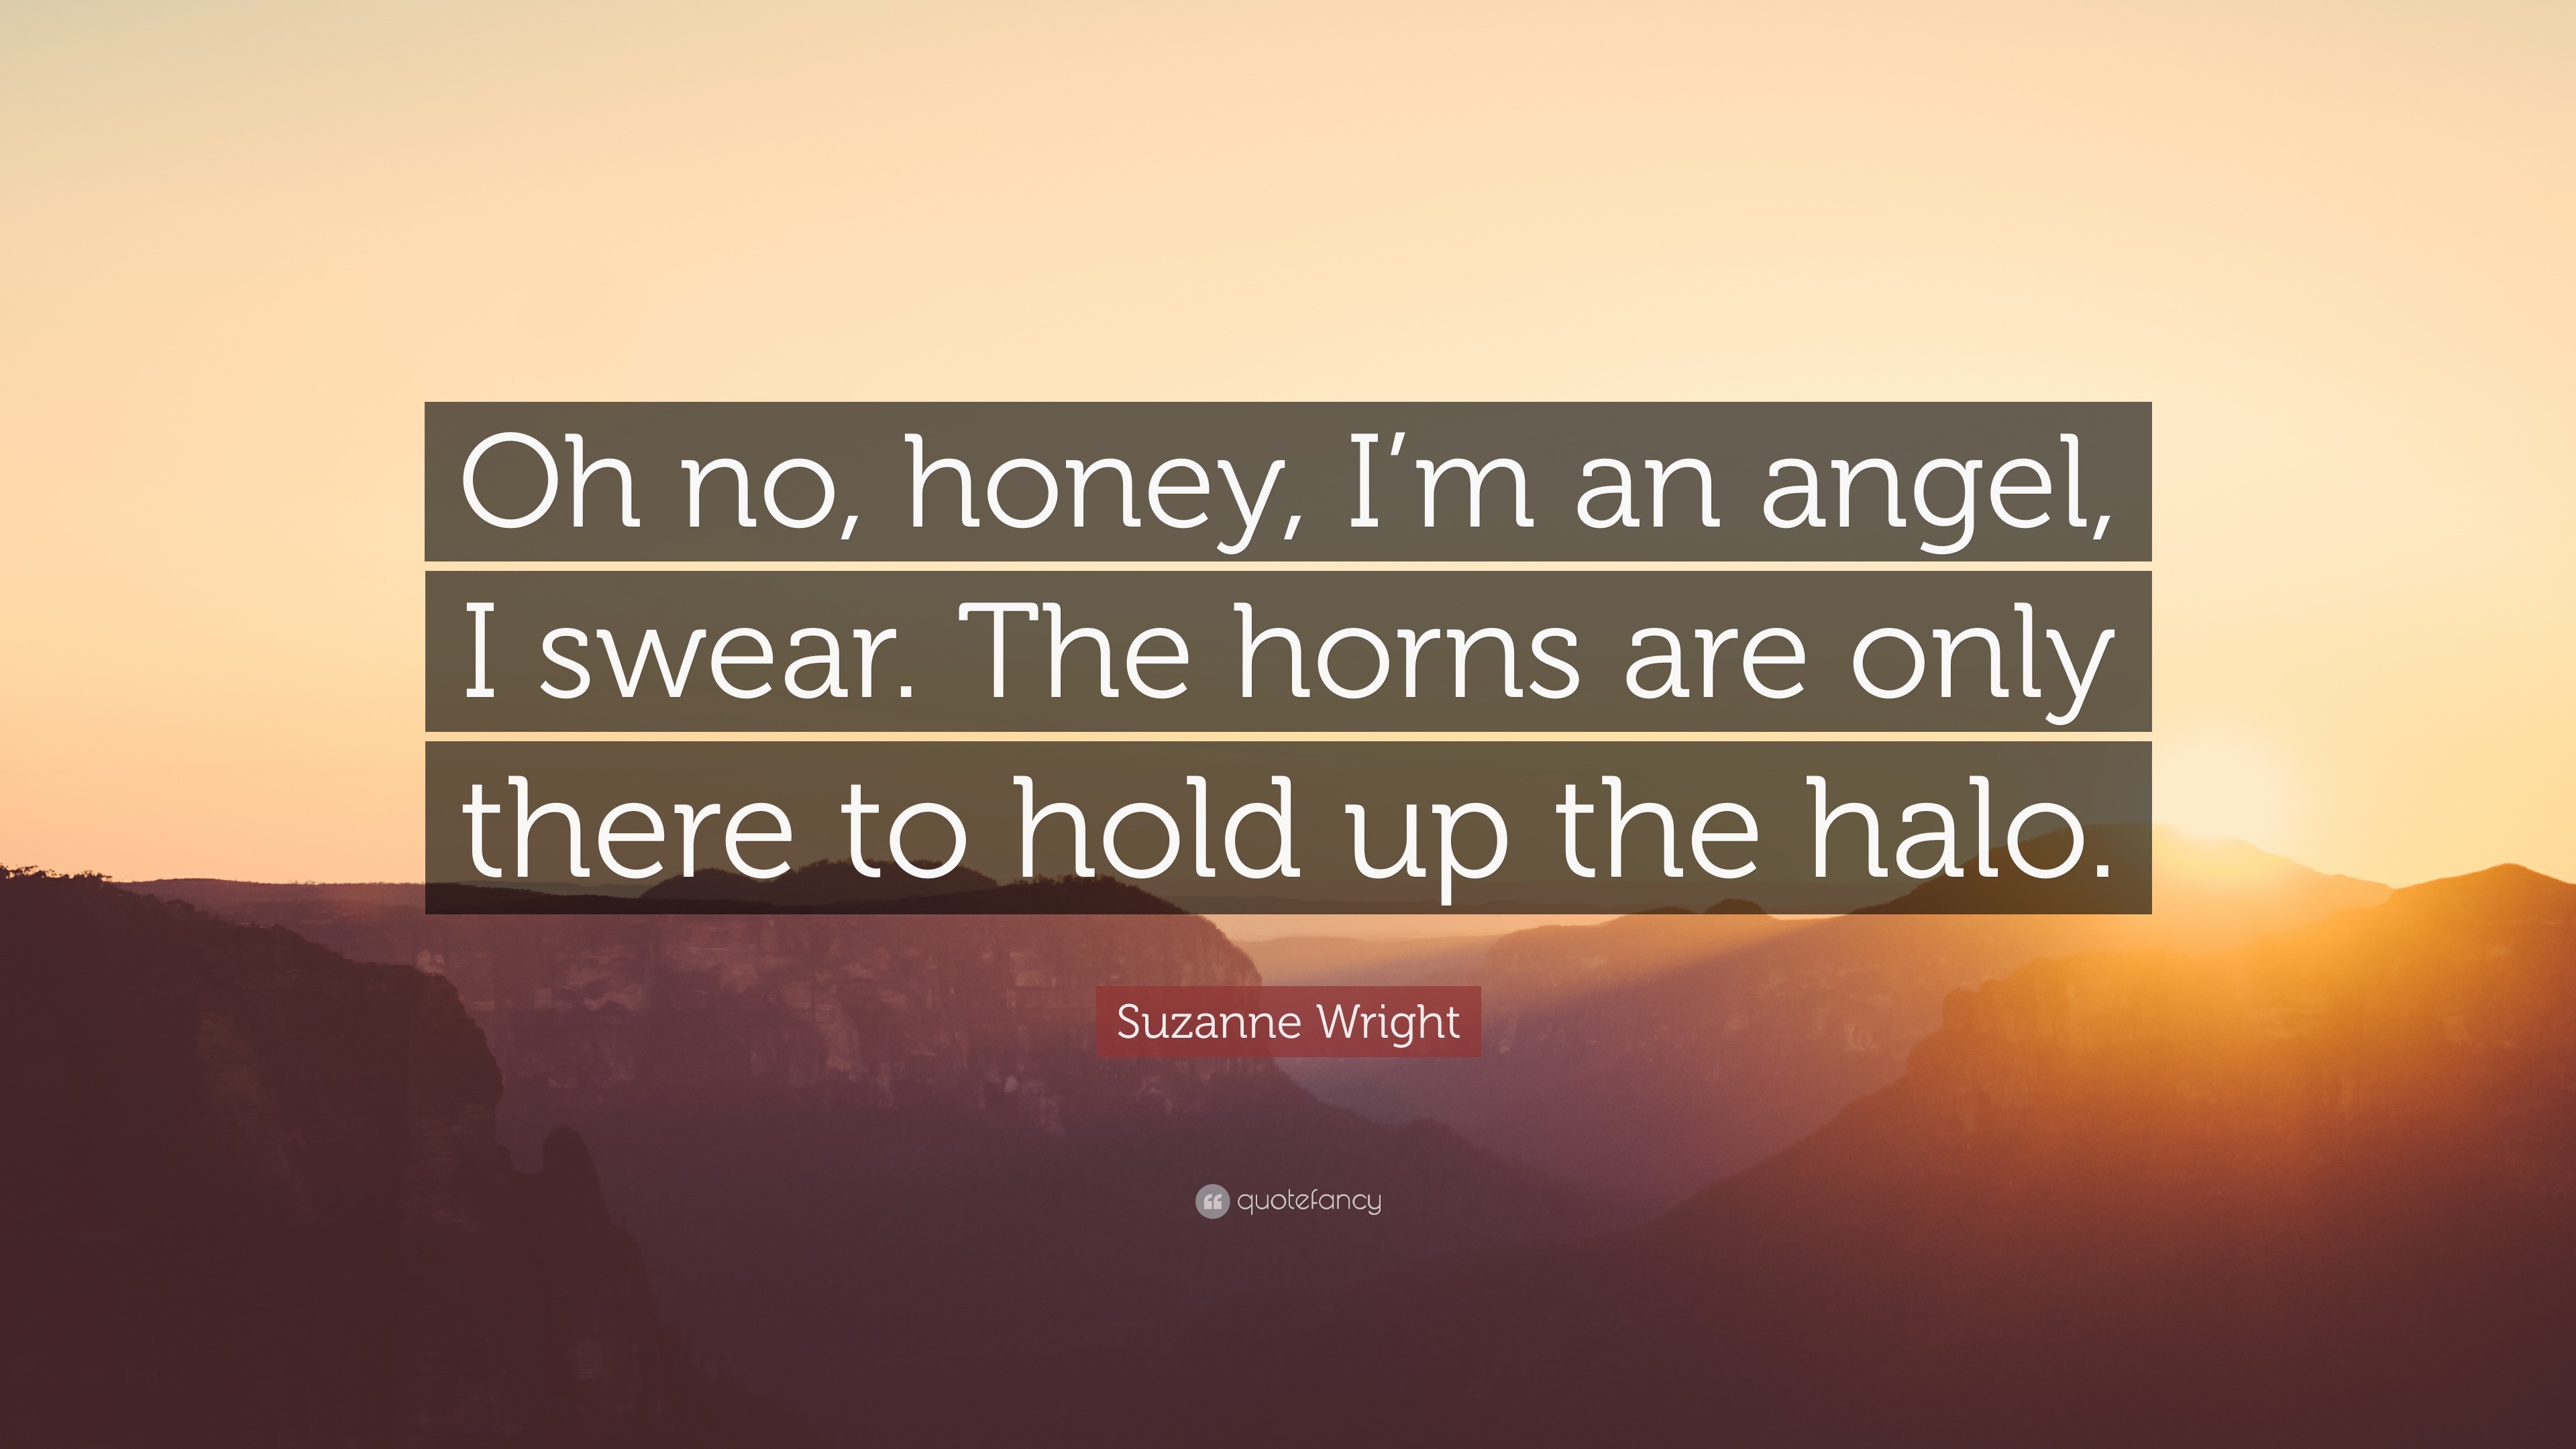 Suzanne Wright Quote: “Oh no, honey, I’m an angel, I swear. The horns